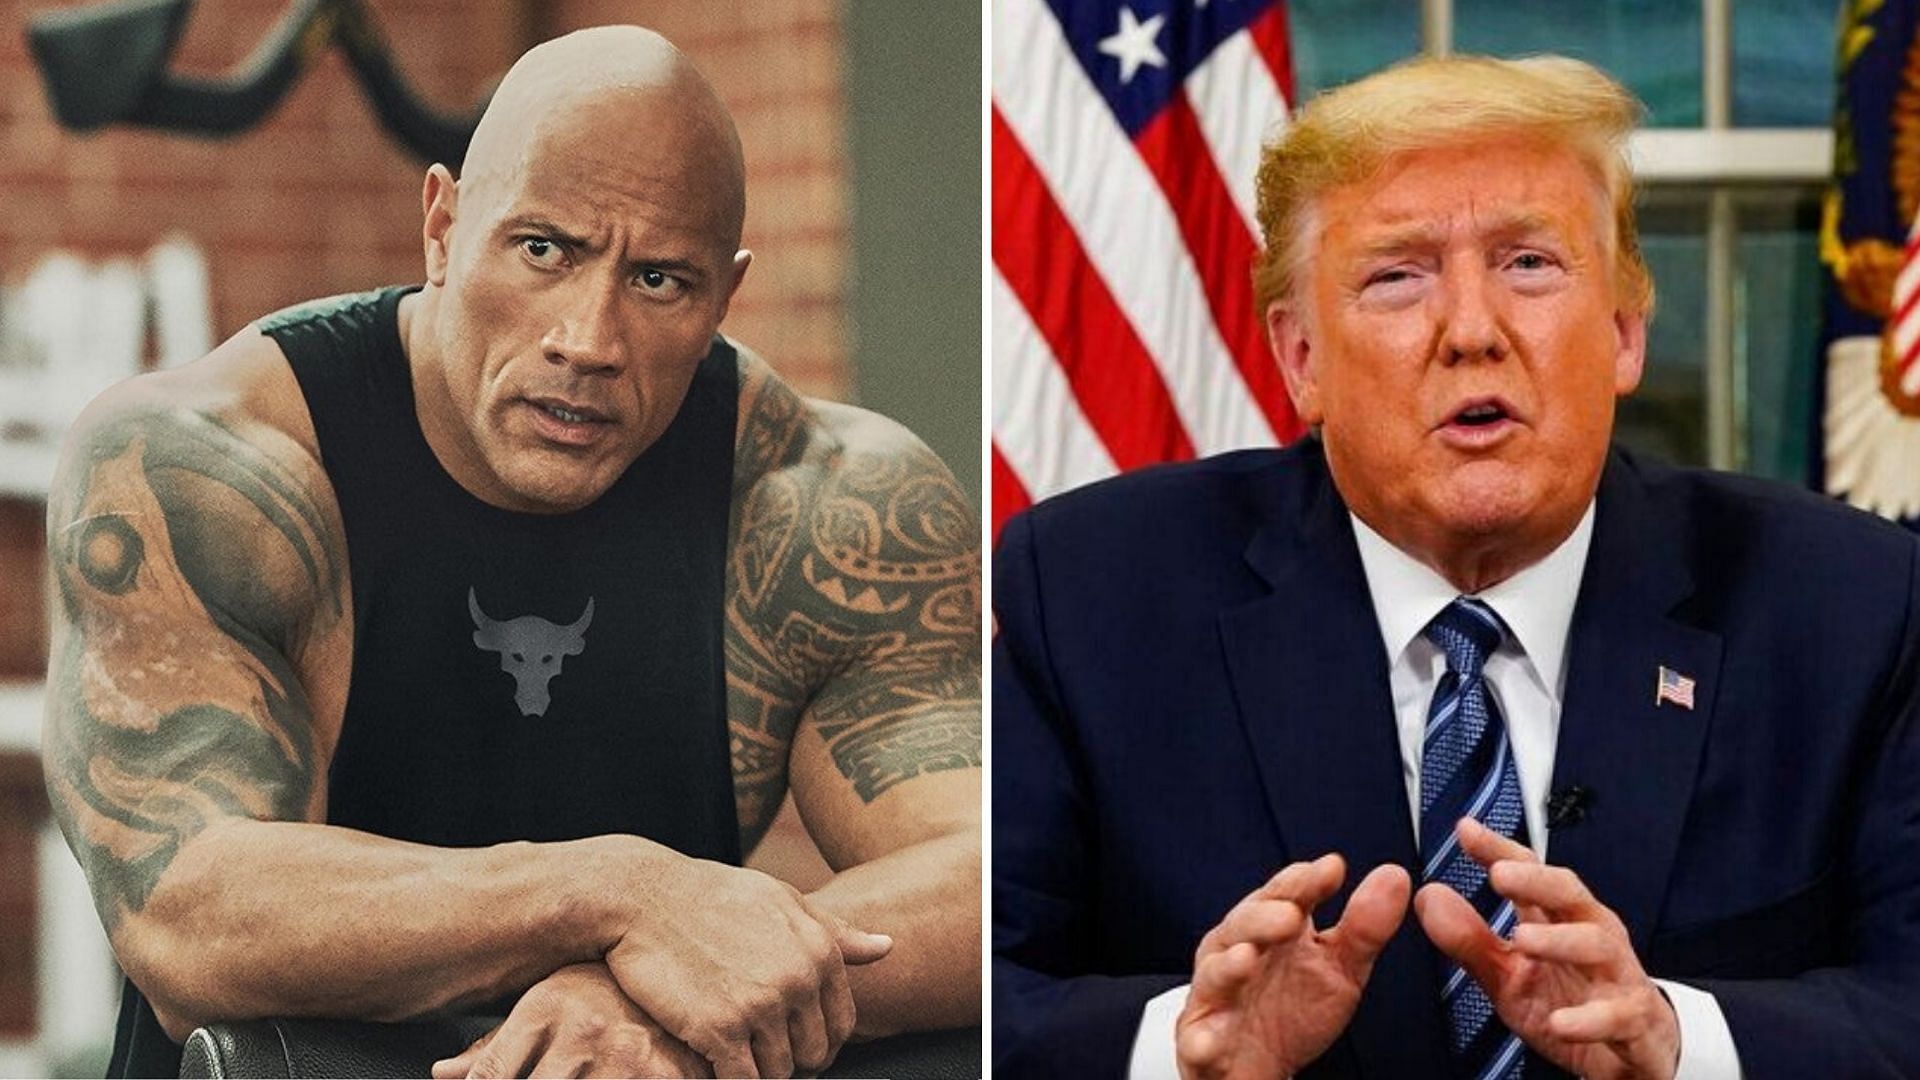 Dwayne Johnson posted a video addressed to US President Donald Trump